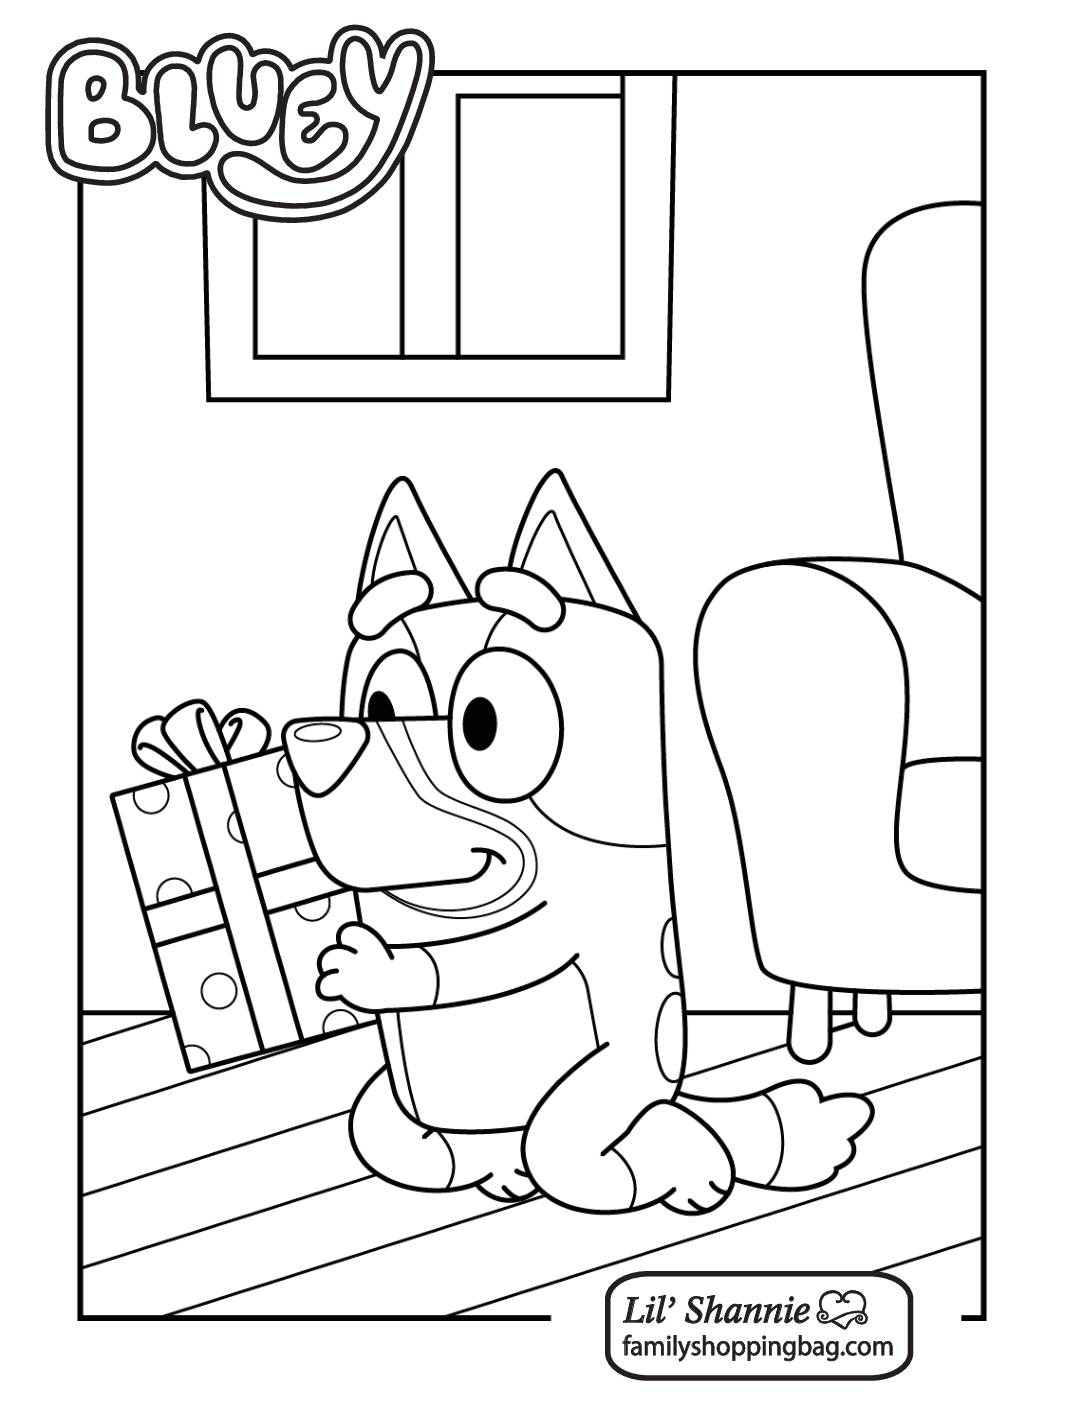 Coloring Page 6 Bluey Coloring Pages